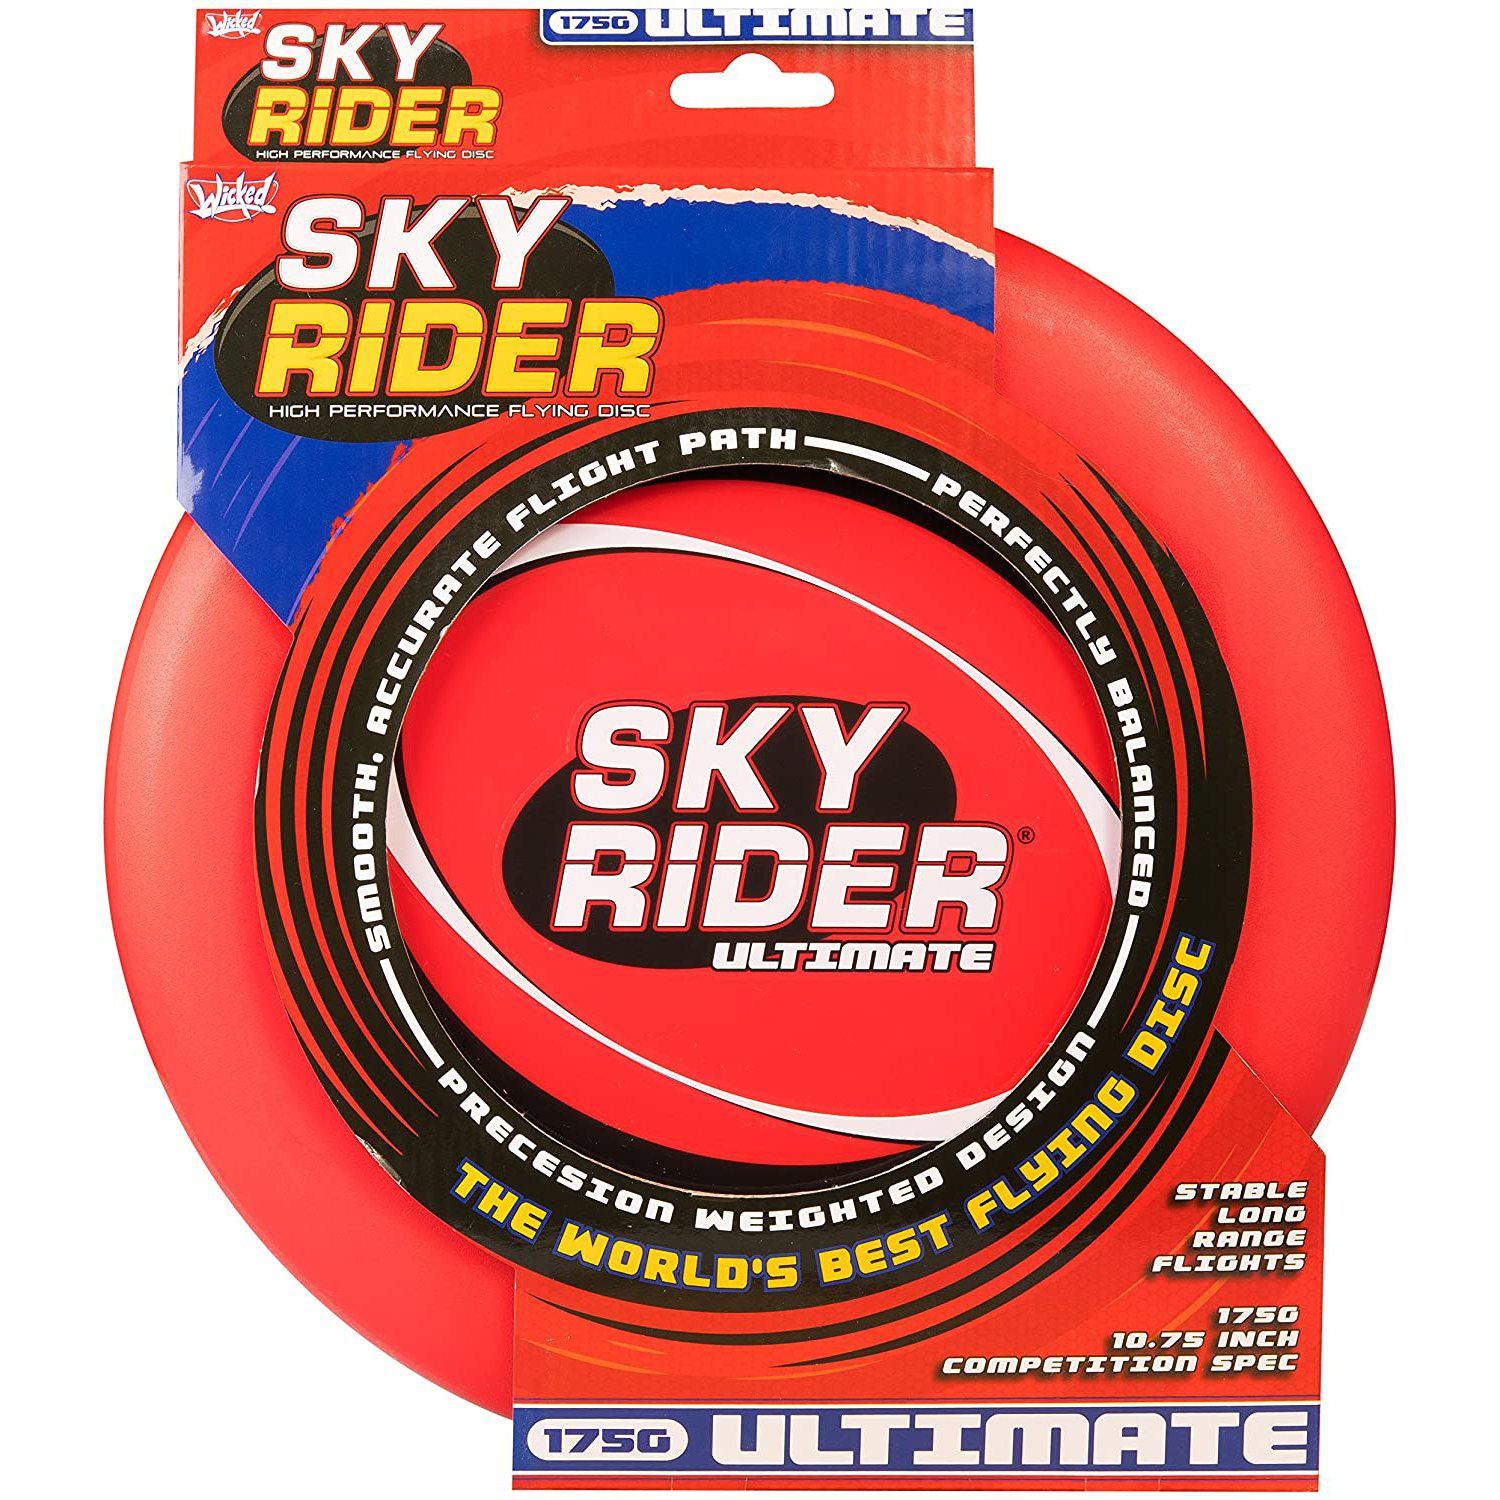 Sky rider ultimate disc in blue.